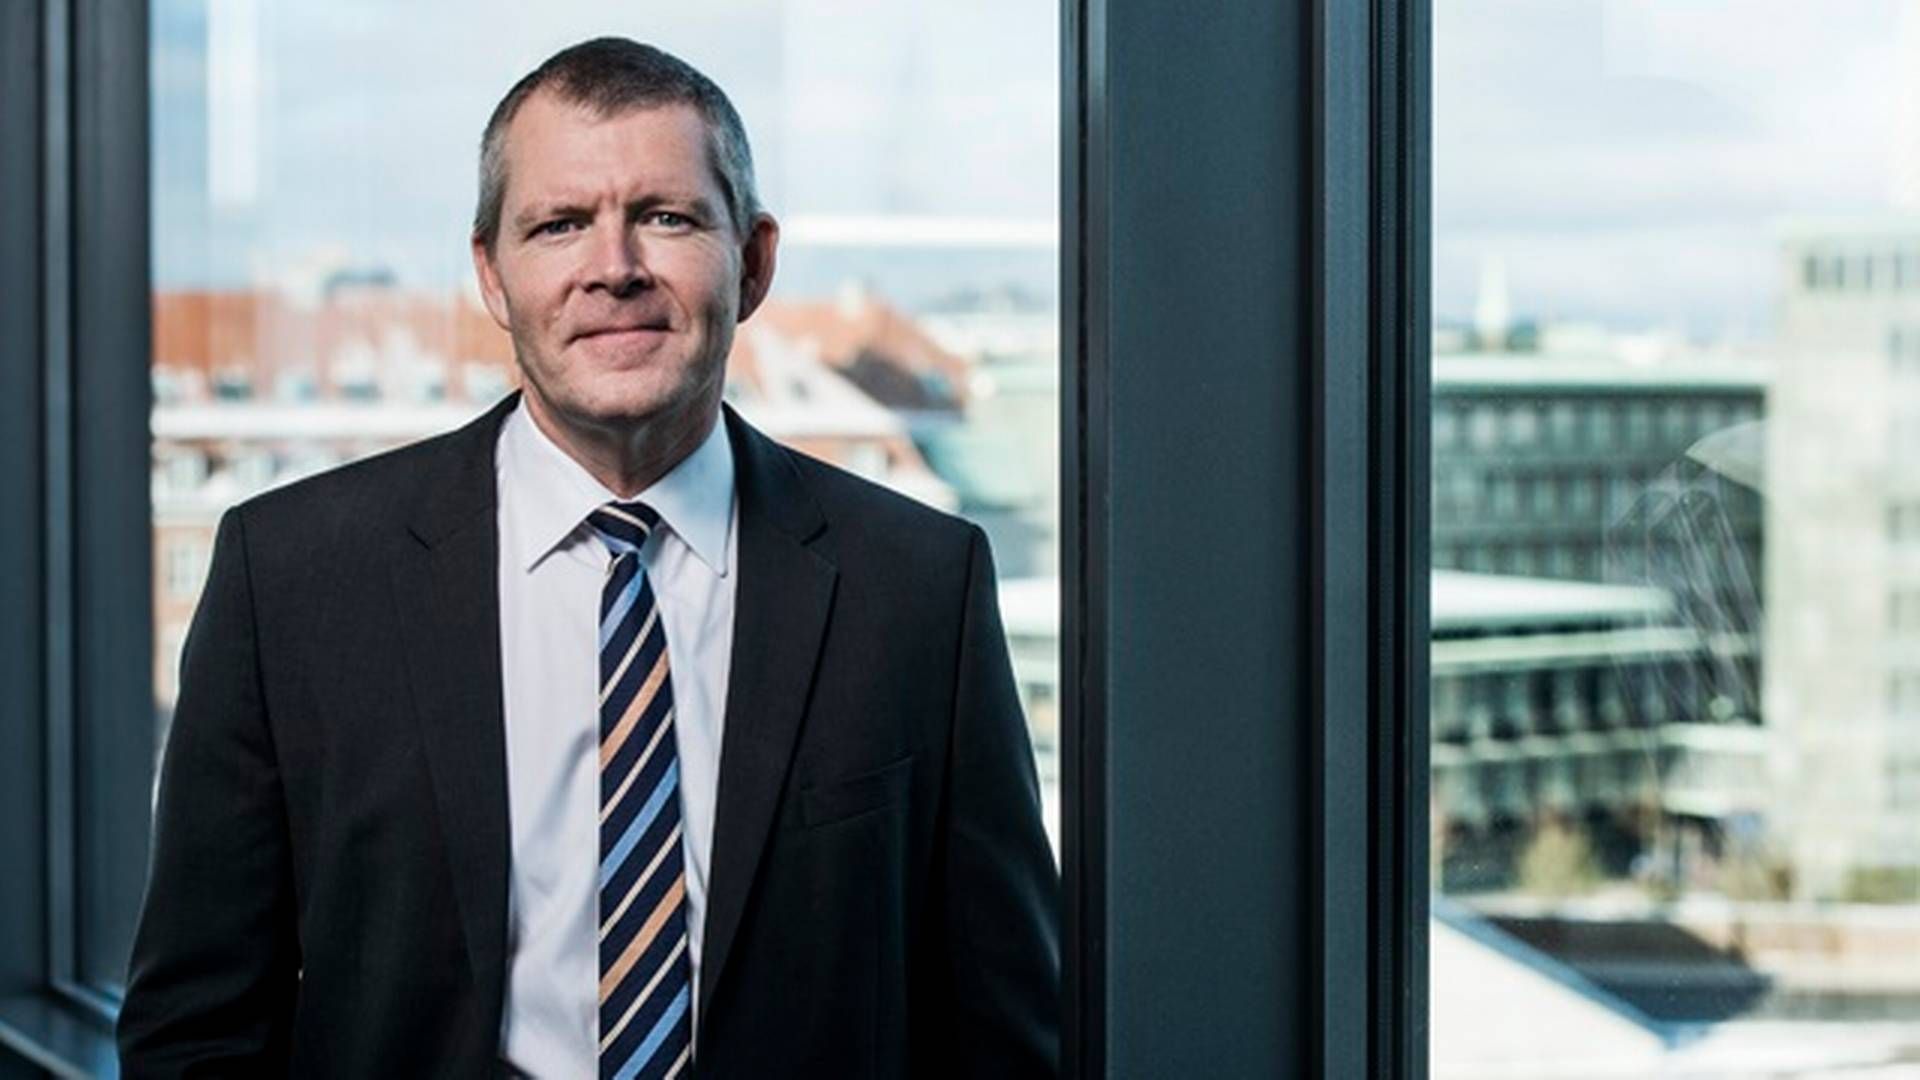 Maersk's former port director, Morten H. Engelstoft, has been nominated as chairman of the board of the new Svitzer. | Photo: Pr-foto